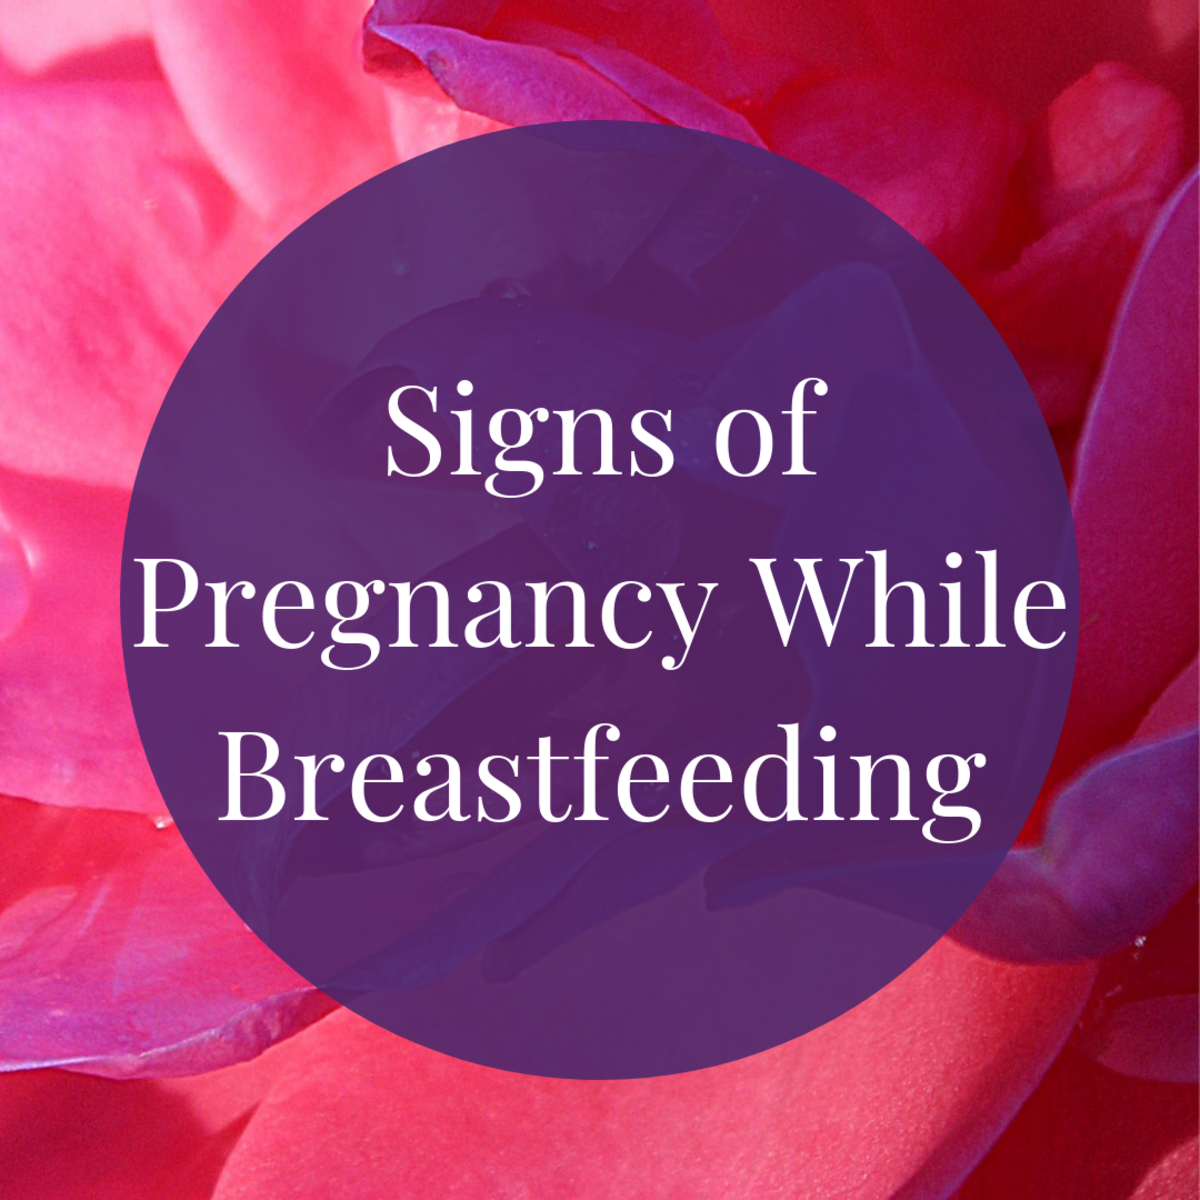 How to Recognize the Signs of Pregnancy While Breastfeeding - WeHaveKids